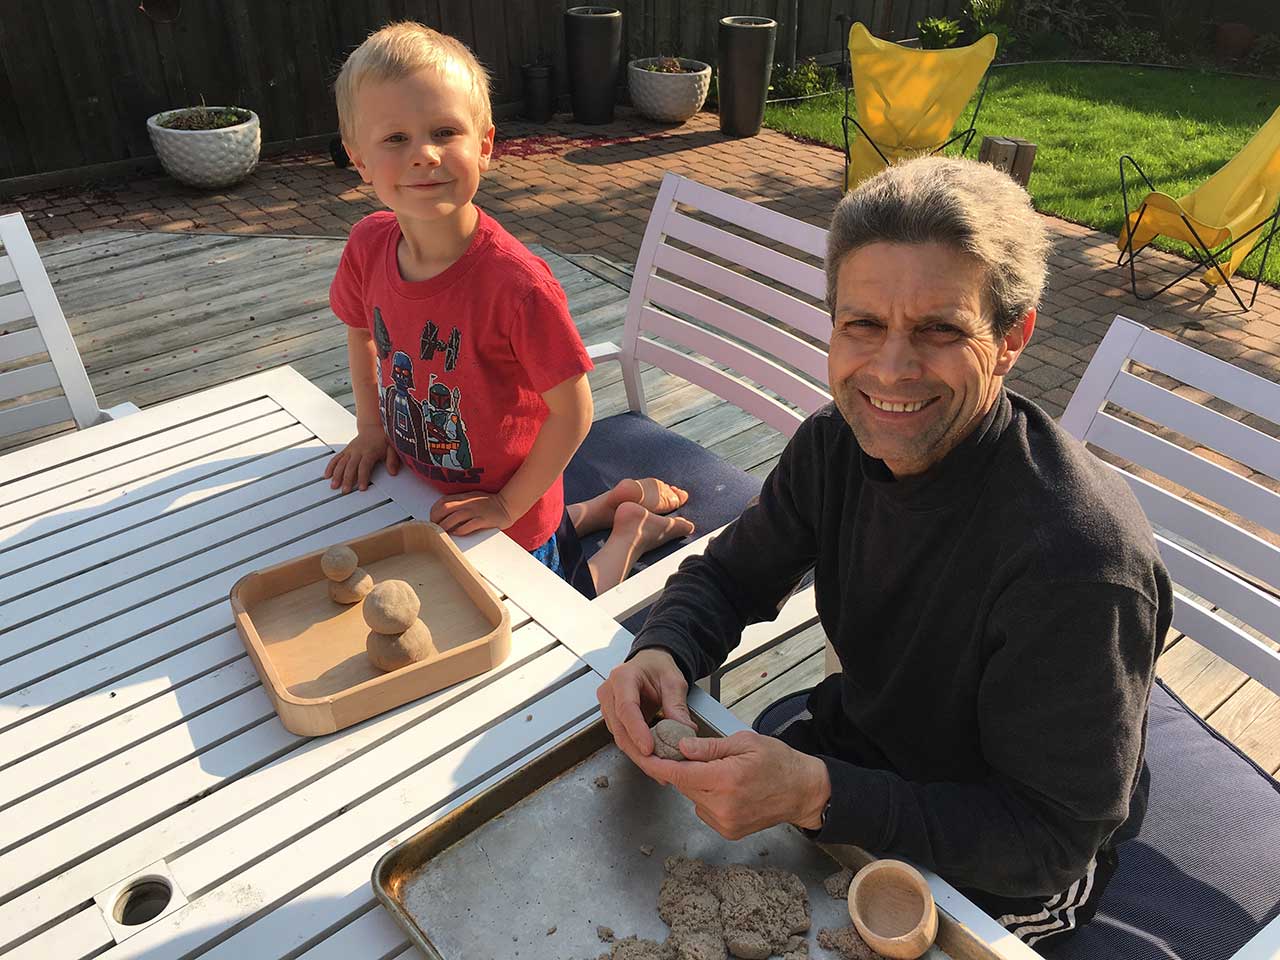 Boy and uncle sculpting sand